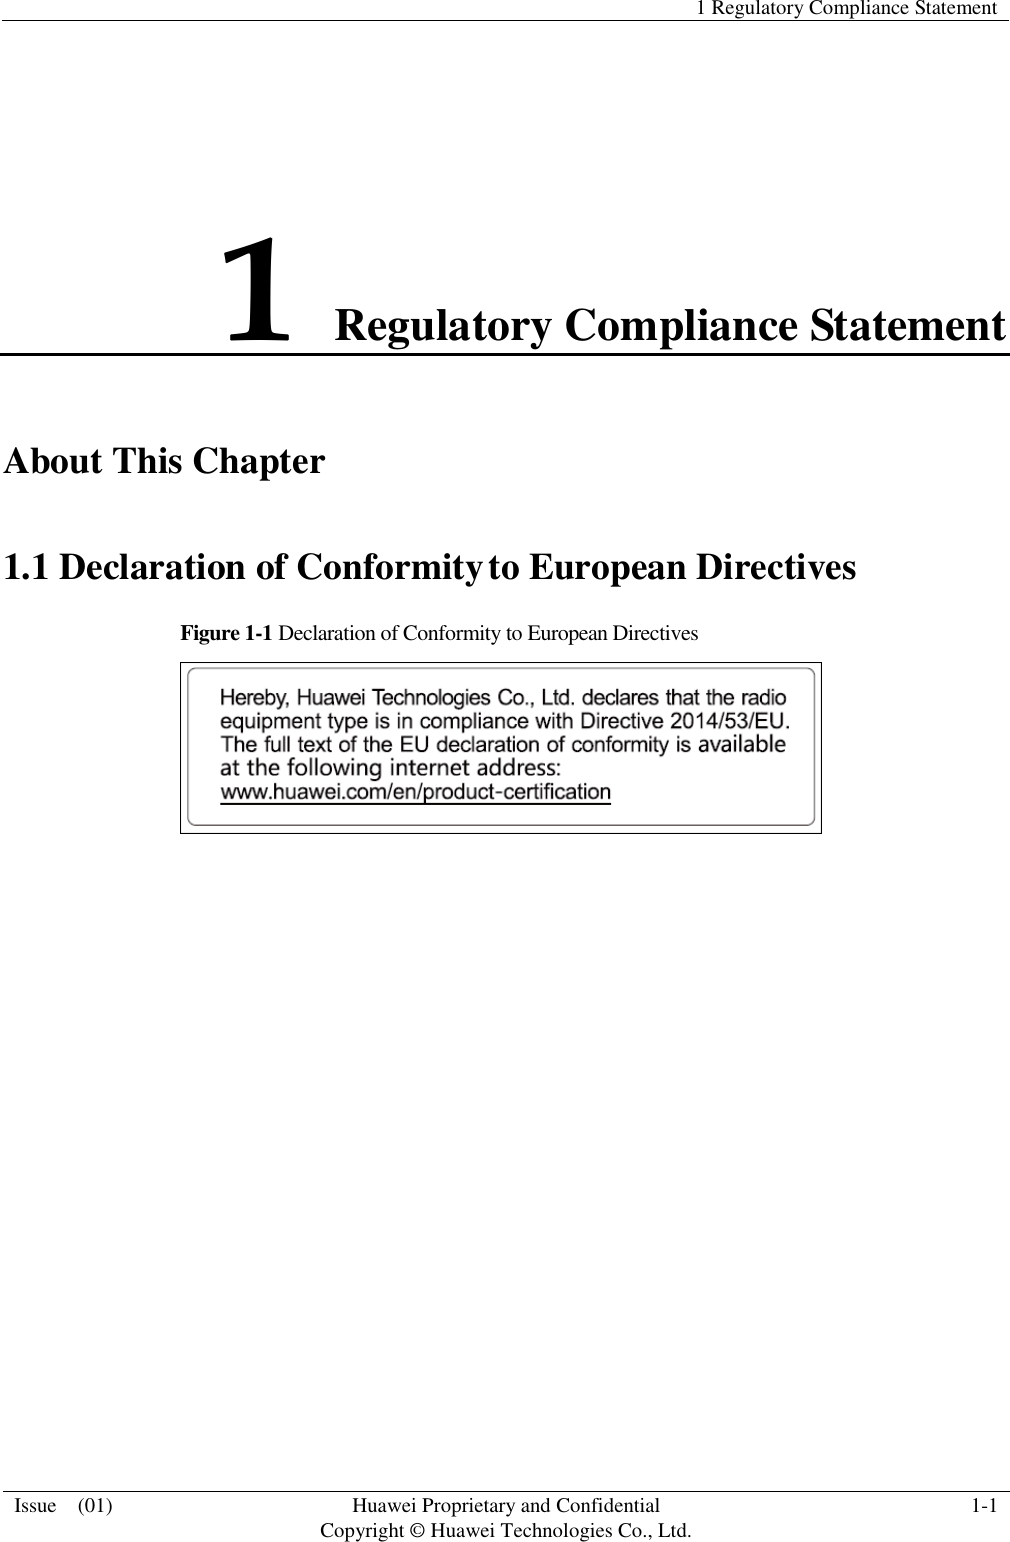   1 Regulatory Compliance Statement  Issue    (01) Huawei Proprietary and Confidential                                     Copyright © Huawei Technologies Co., Ltd. 1-1  1 Regulatory Compliance Statement About This Chapter 1.1 Declaration of Conformity to European Directives Figure 1-1 Declaration of Conformity to European Directives    